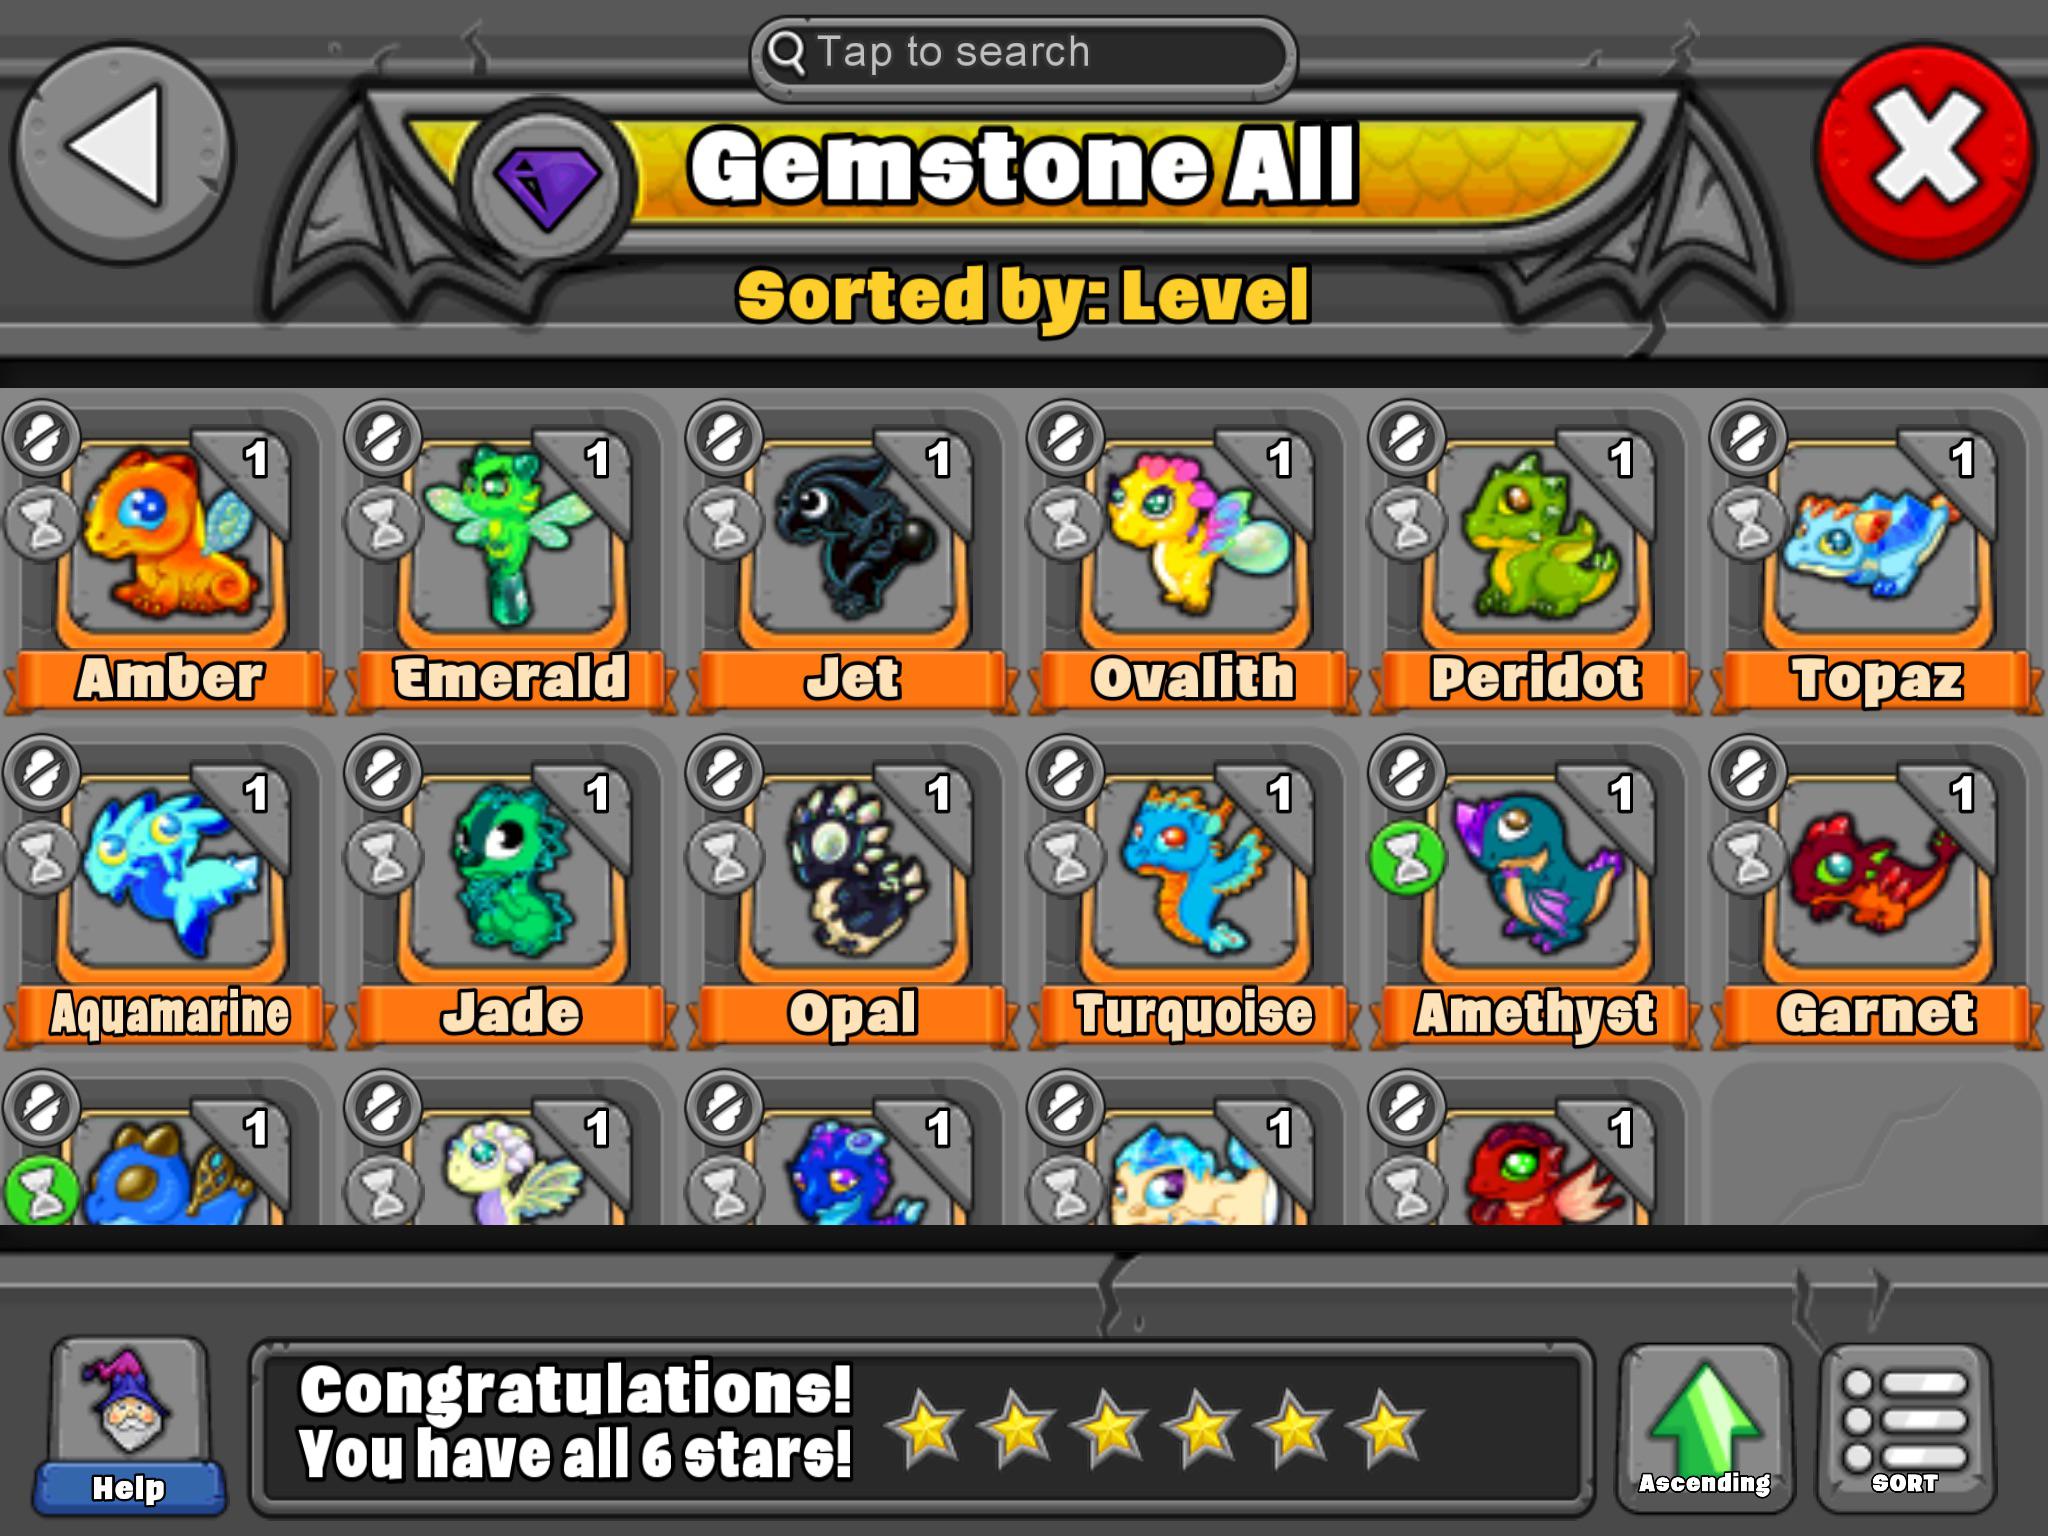 How To Get A Gemstone Dragon In Dragonvale